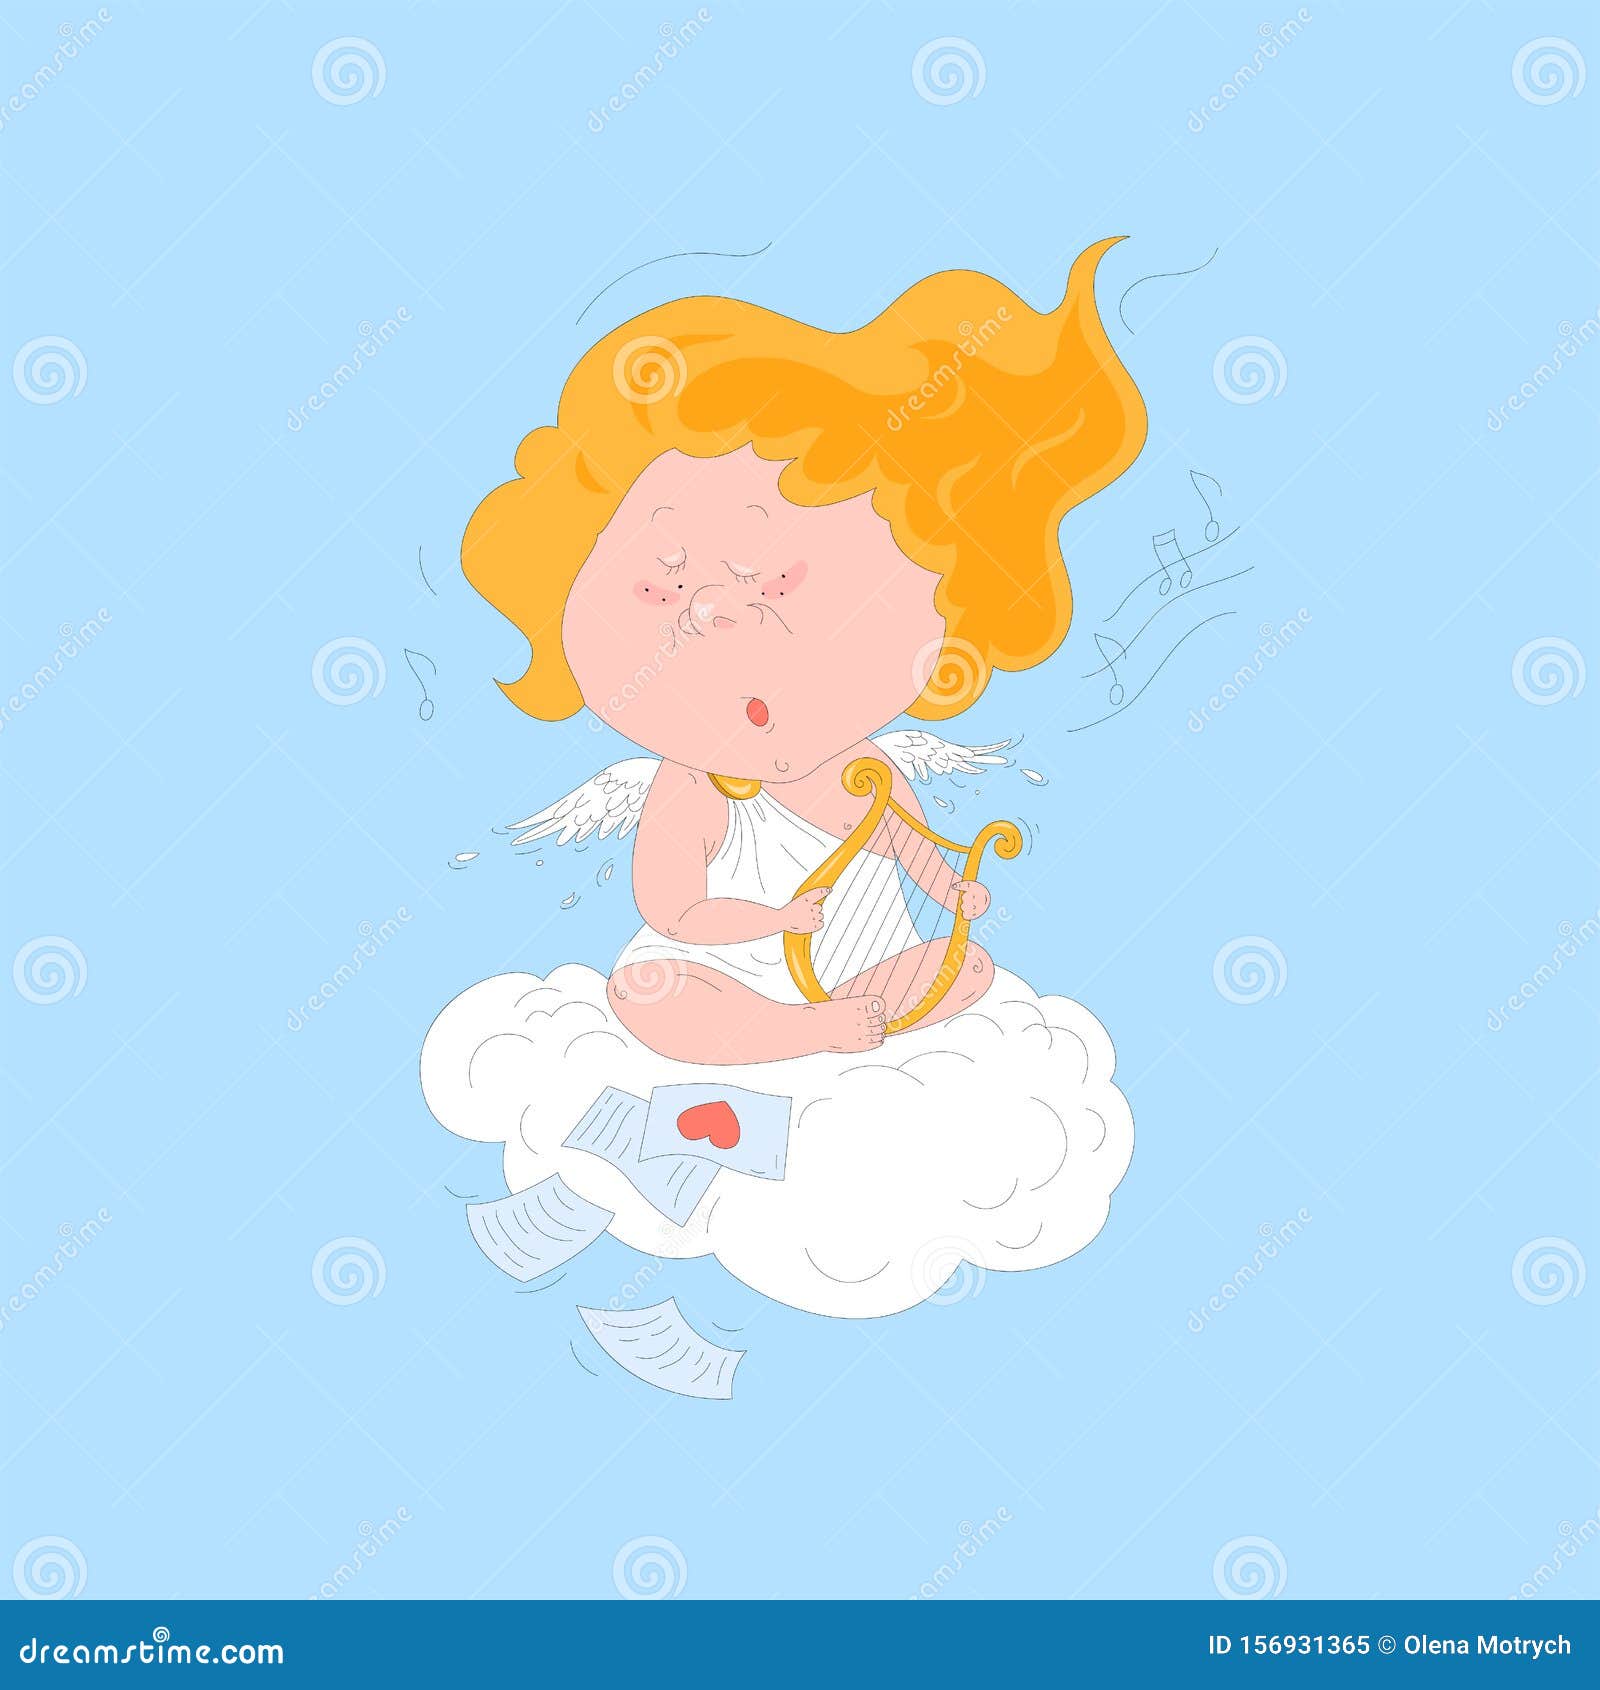 Cute Cartoon Angel Cupidon Sings a Love Song and Plais on Arpha, Sits on  White Cloud in the Sky. Stock Vector - Illustration of funny, angel:  156931365